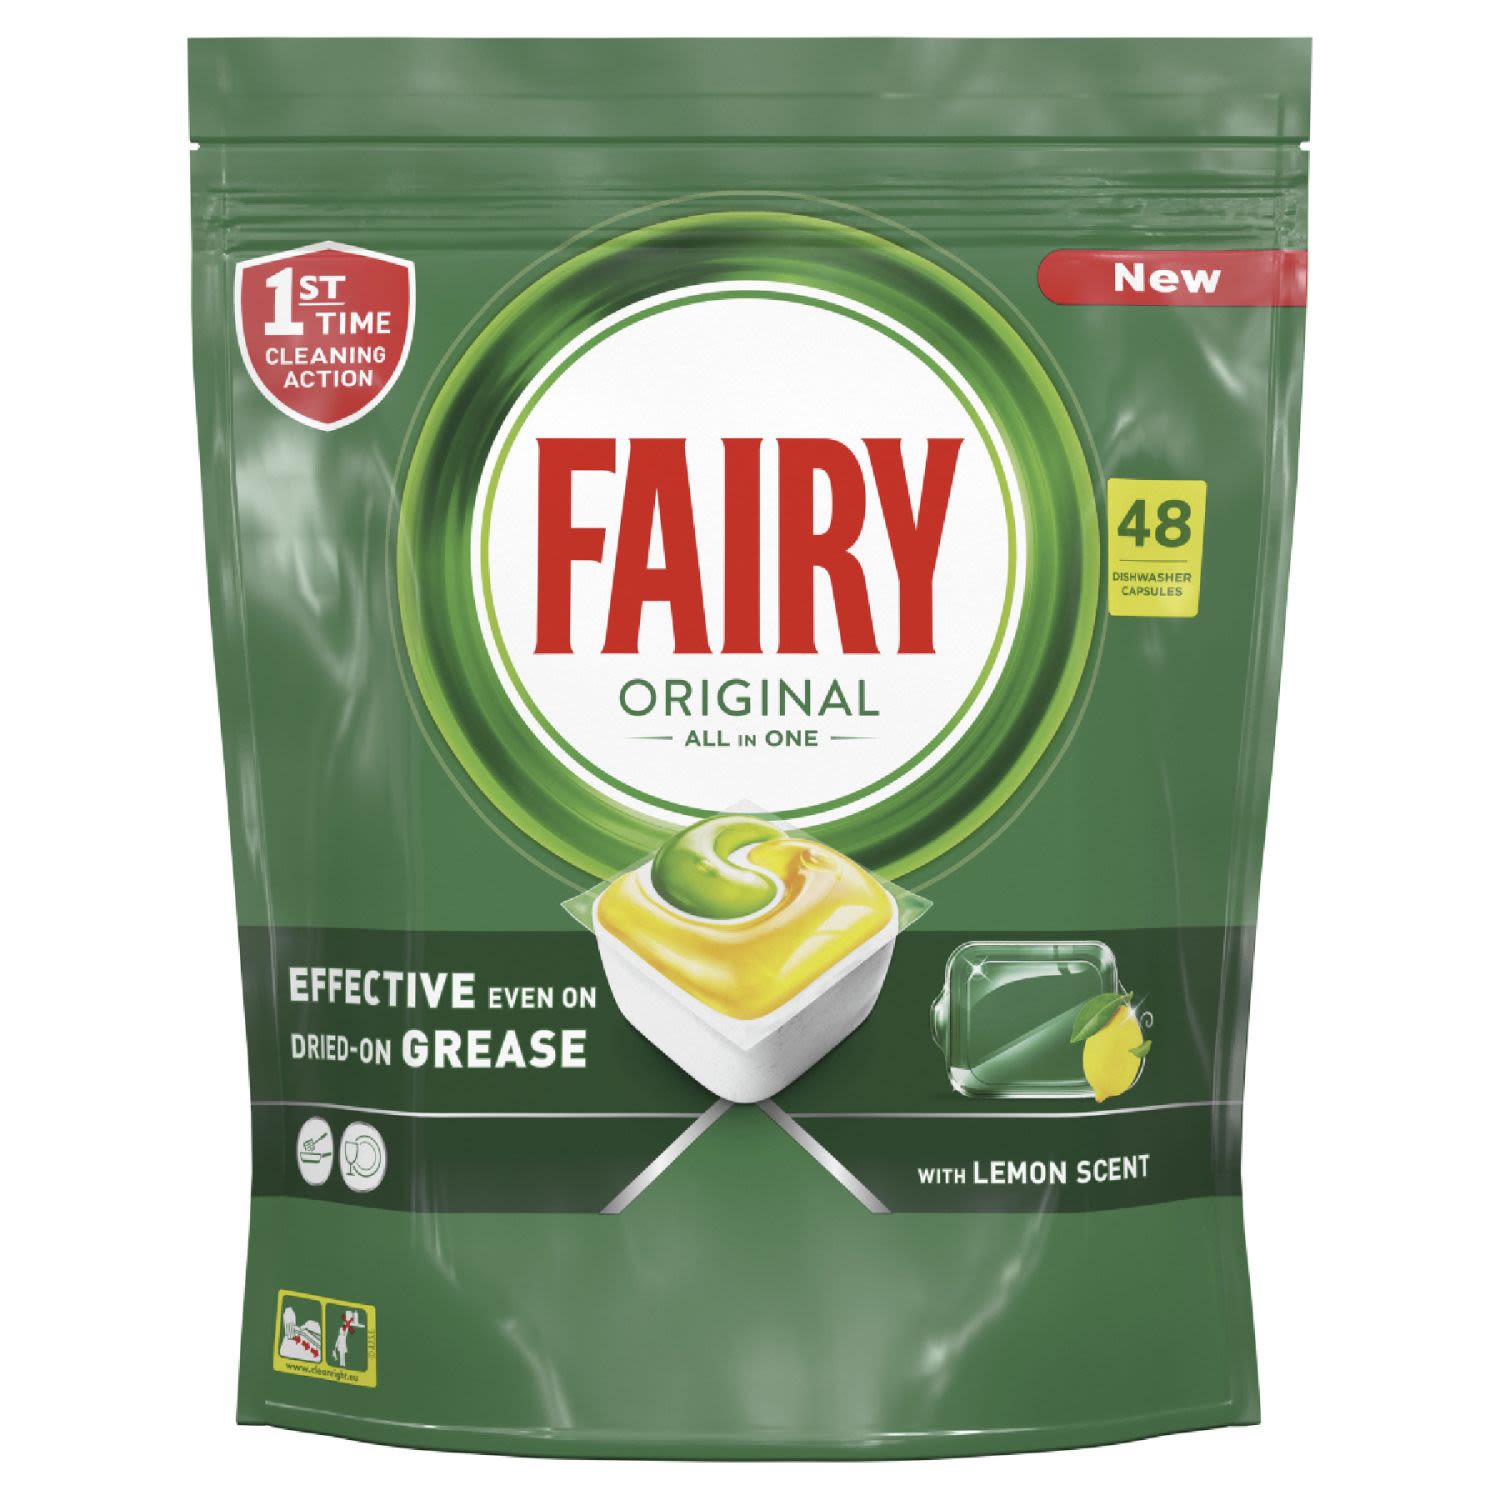 Fairy Original All In One Automatic Dishwasher Tablets, 48 Each